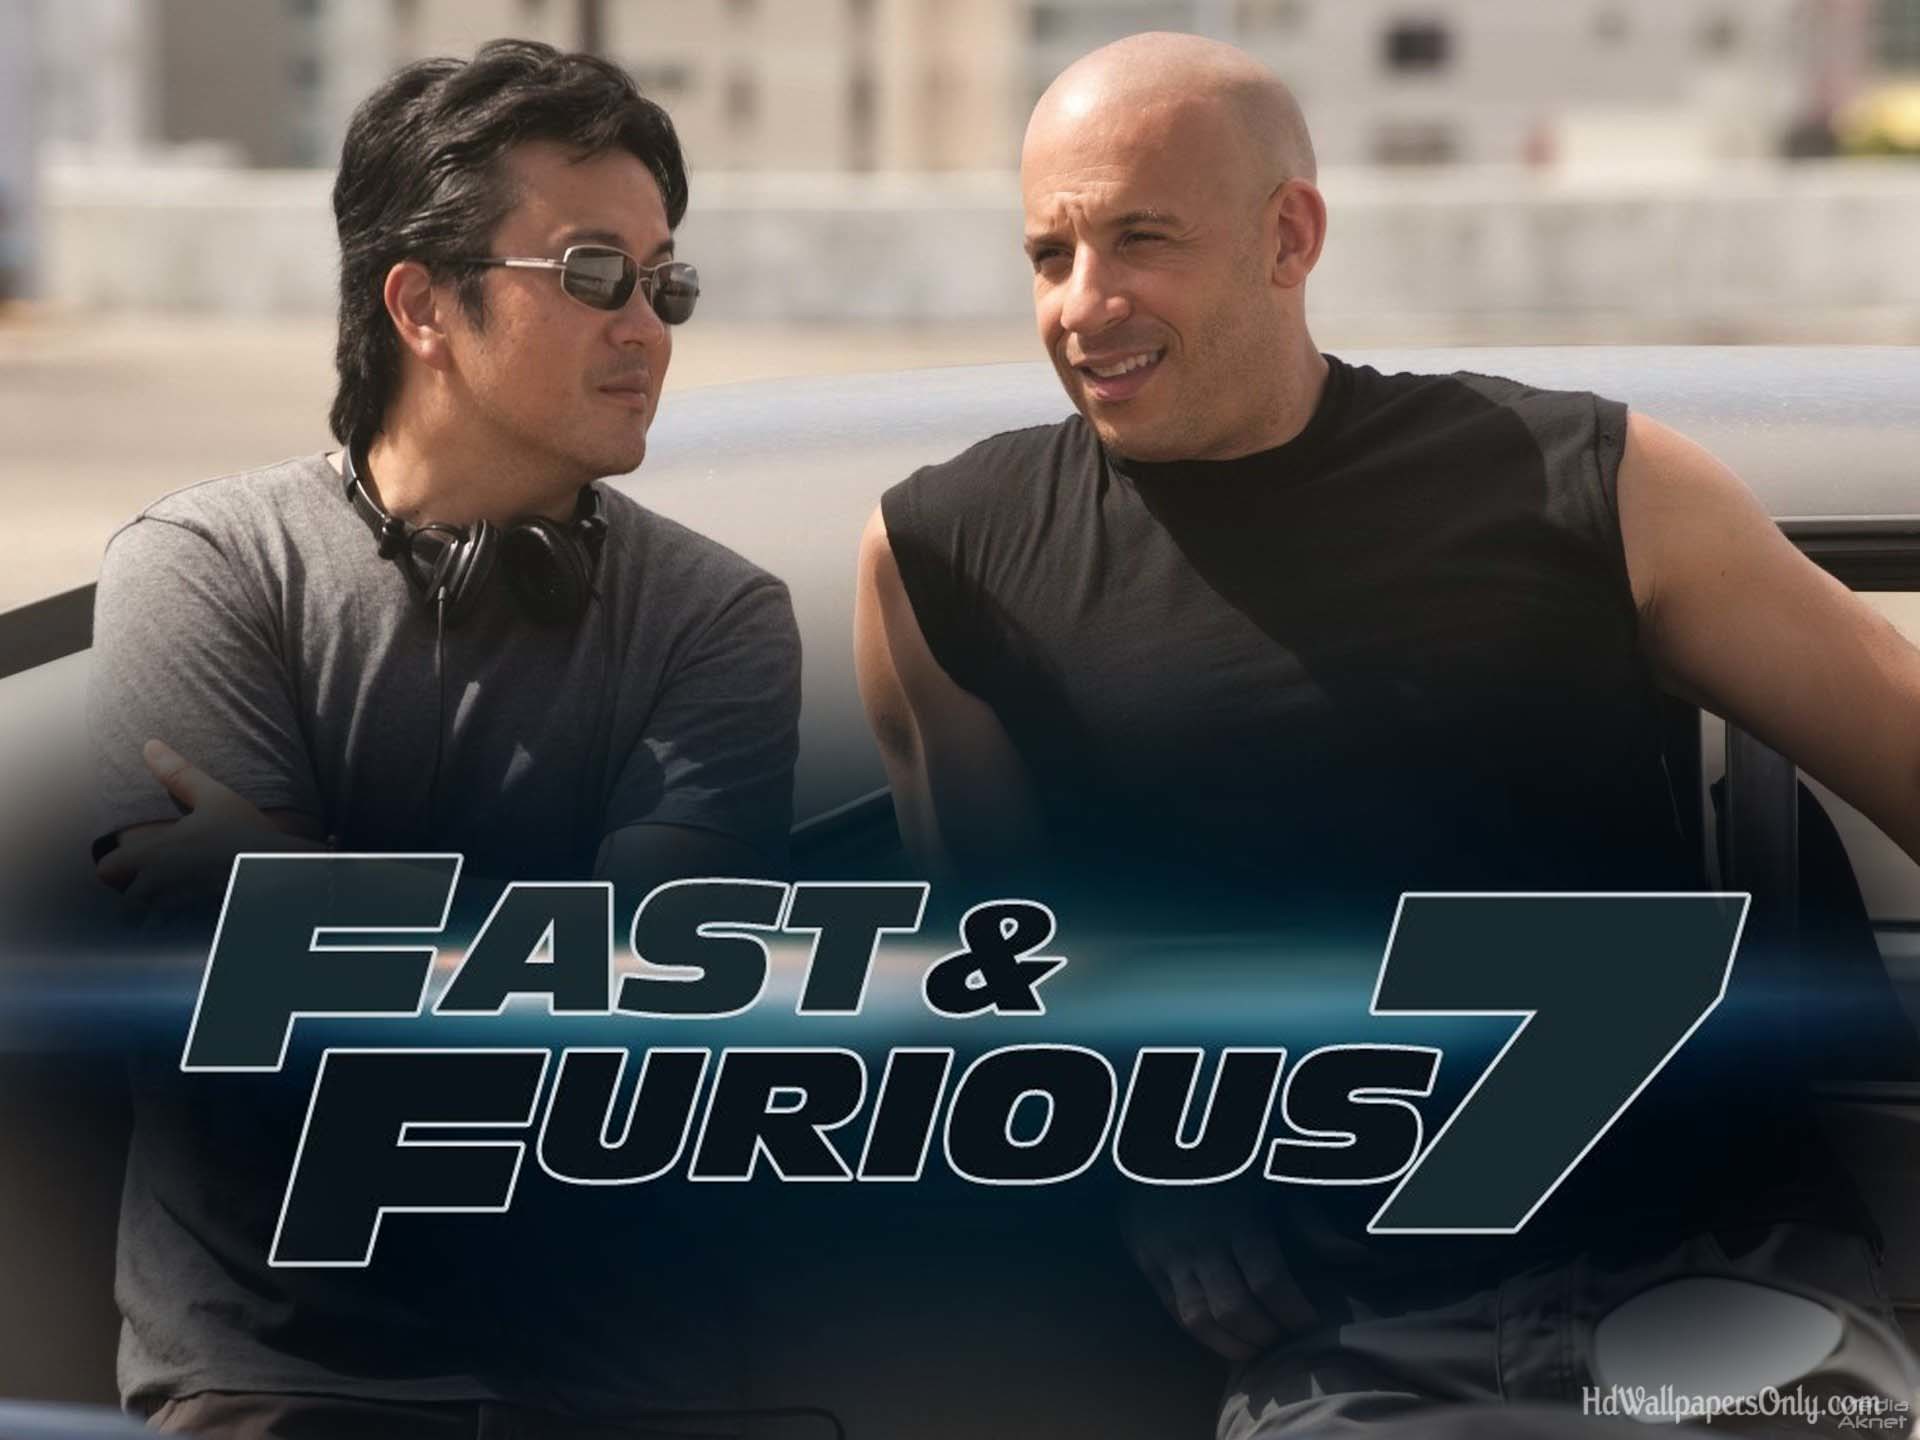 1920x1440 Fast and Furious 7 Wallpapers HD Wallpapers OnlyHD Wallpapers Only 4